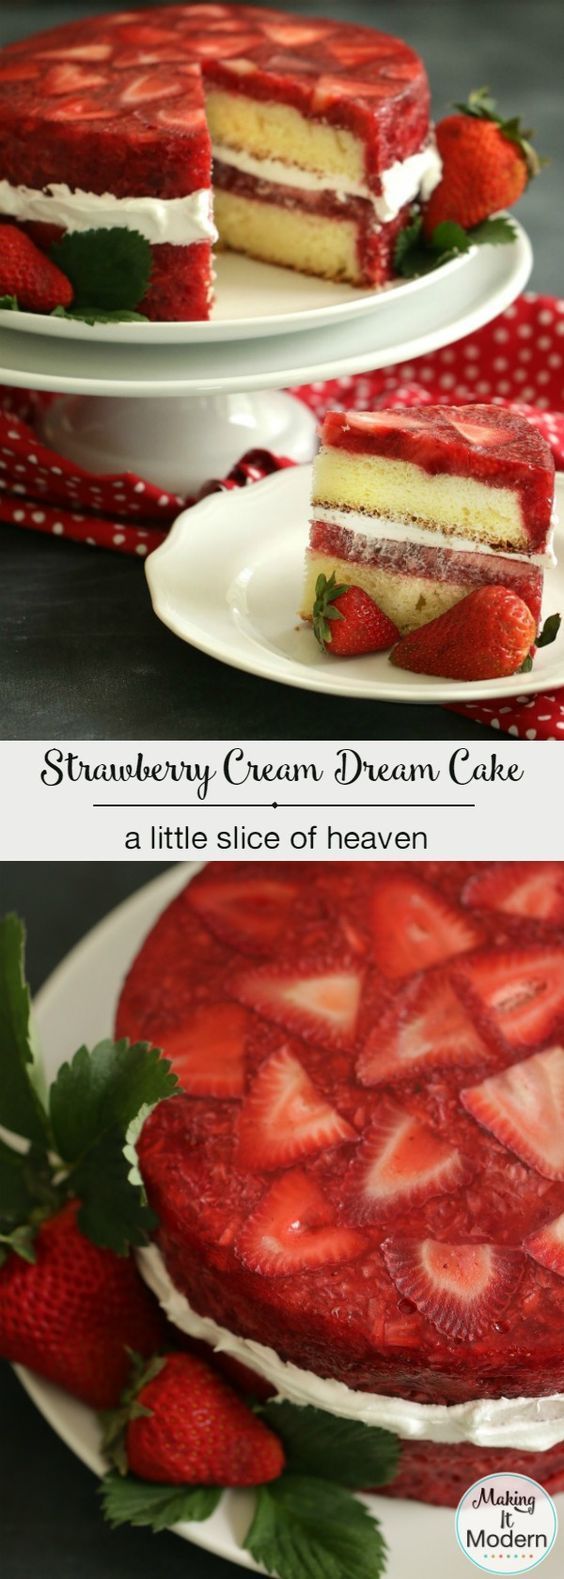 This strawberry cream dream cake is a little slice of heaven! Includes the vintage recipe and a fun how-to video!